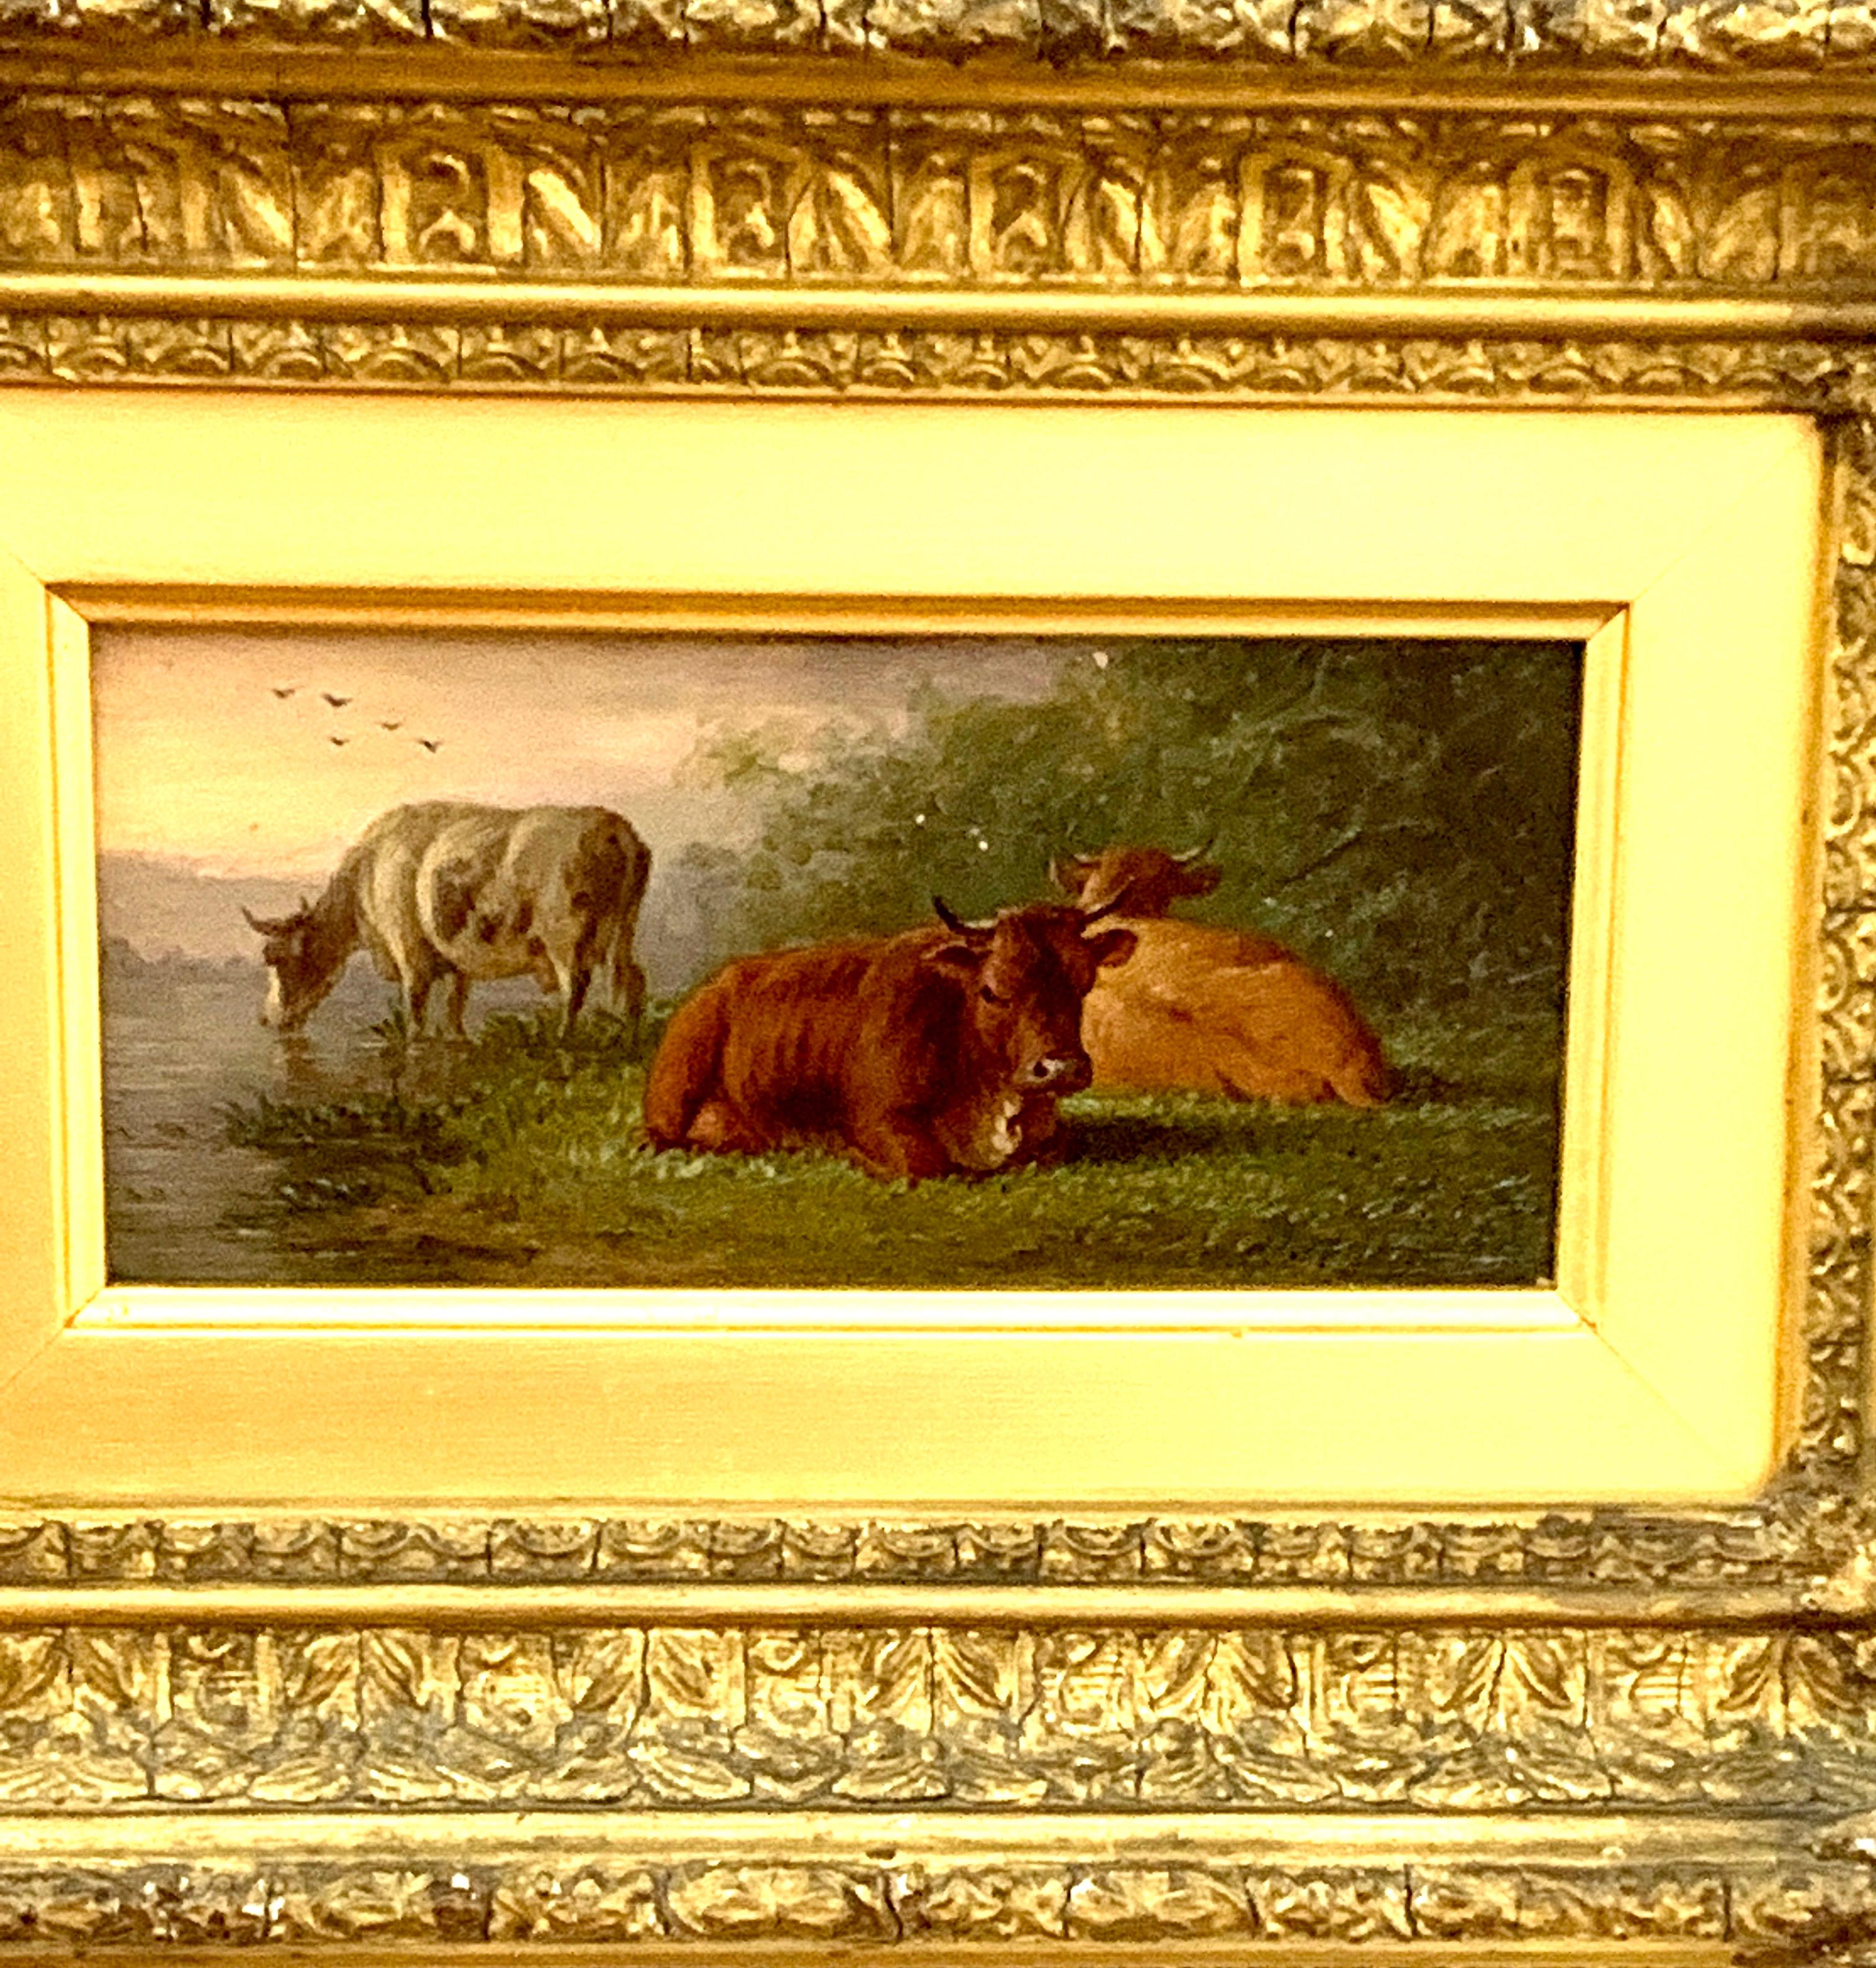 19th century Antique English Farm scene with cows resting in a landscape - Painting by Henry Charles Bryant